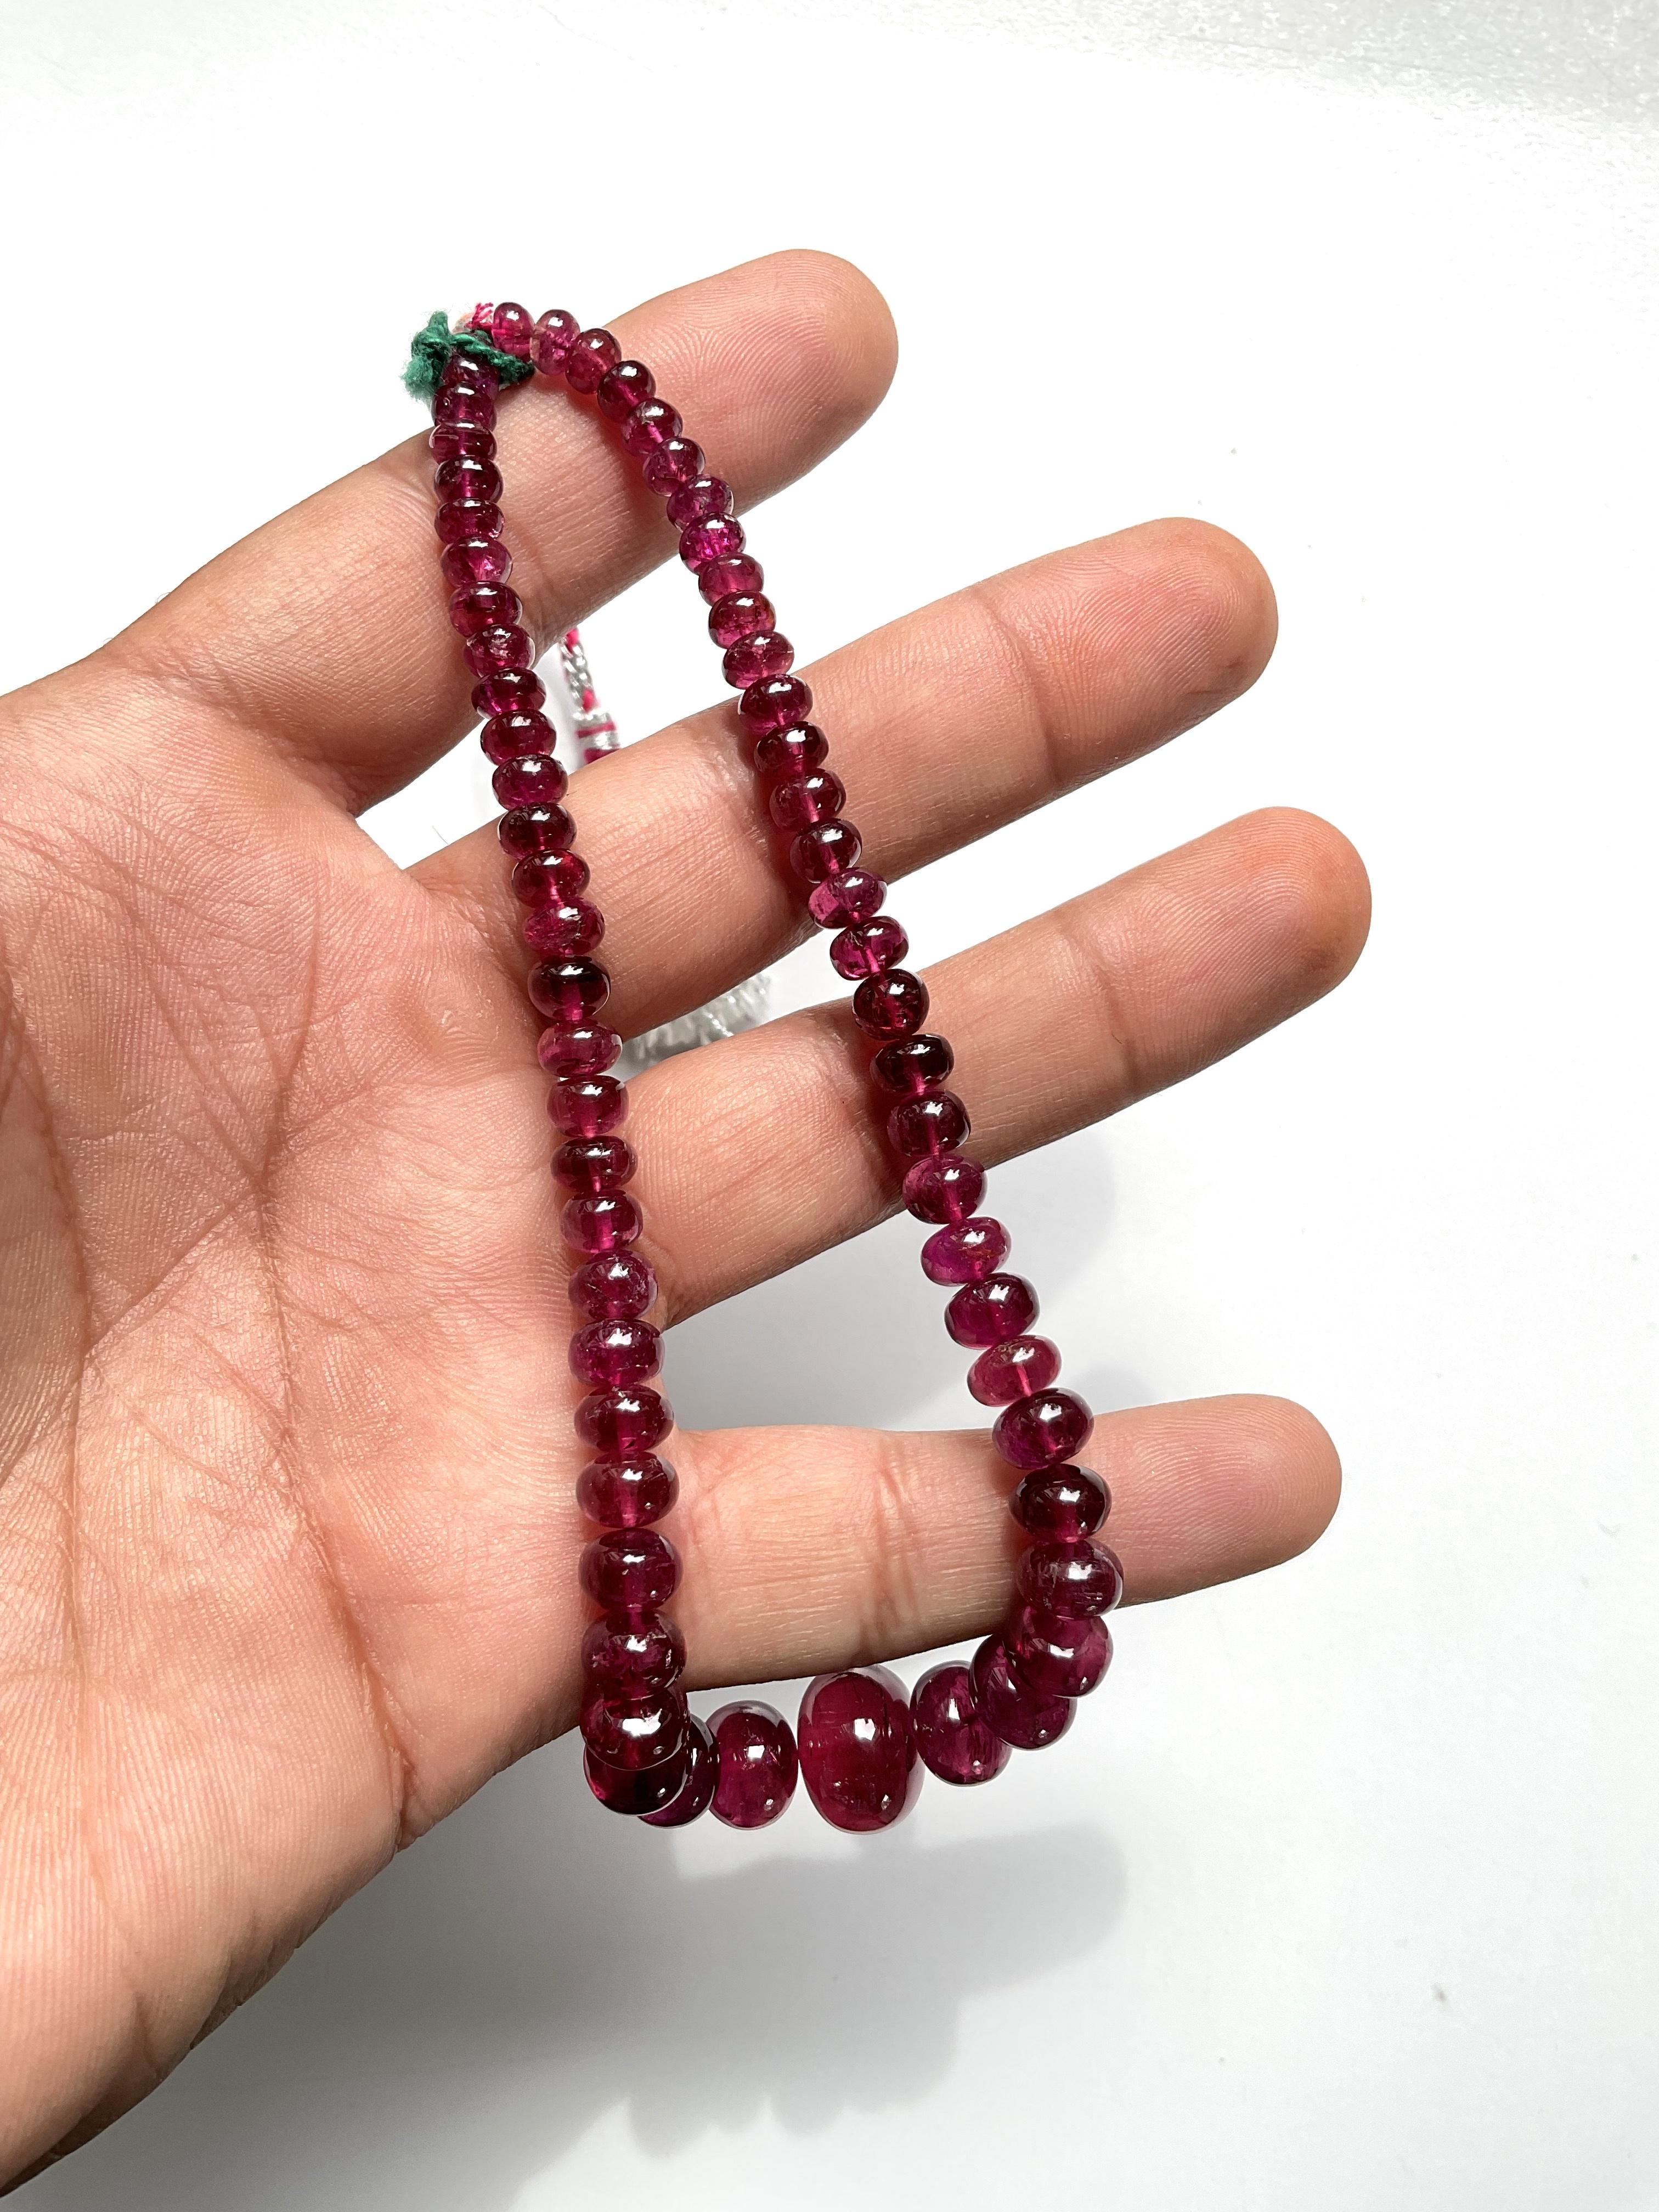 Bead 117.00 carats Rubellite Tourmaline rondelles Fine natural gemstones for Jewelry  For Sale